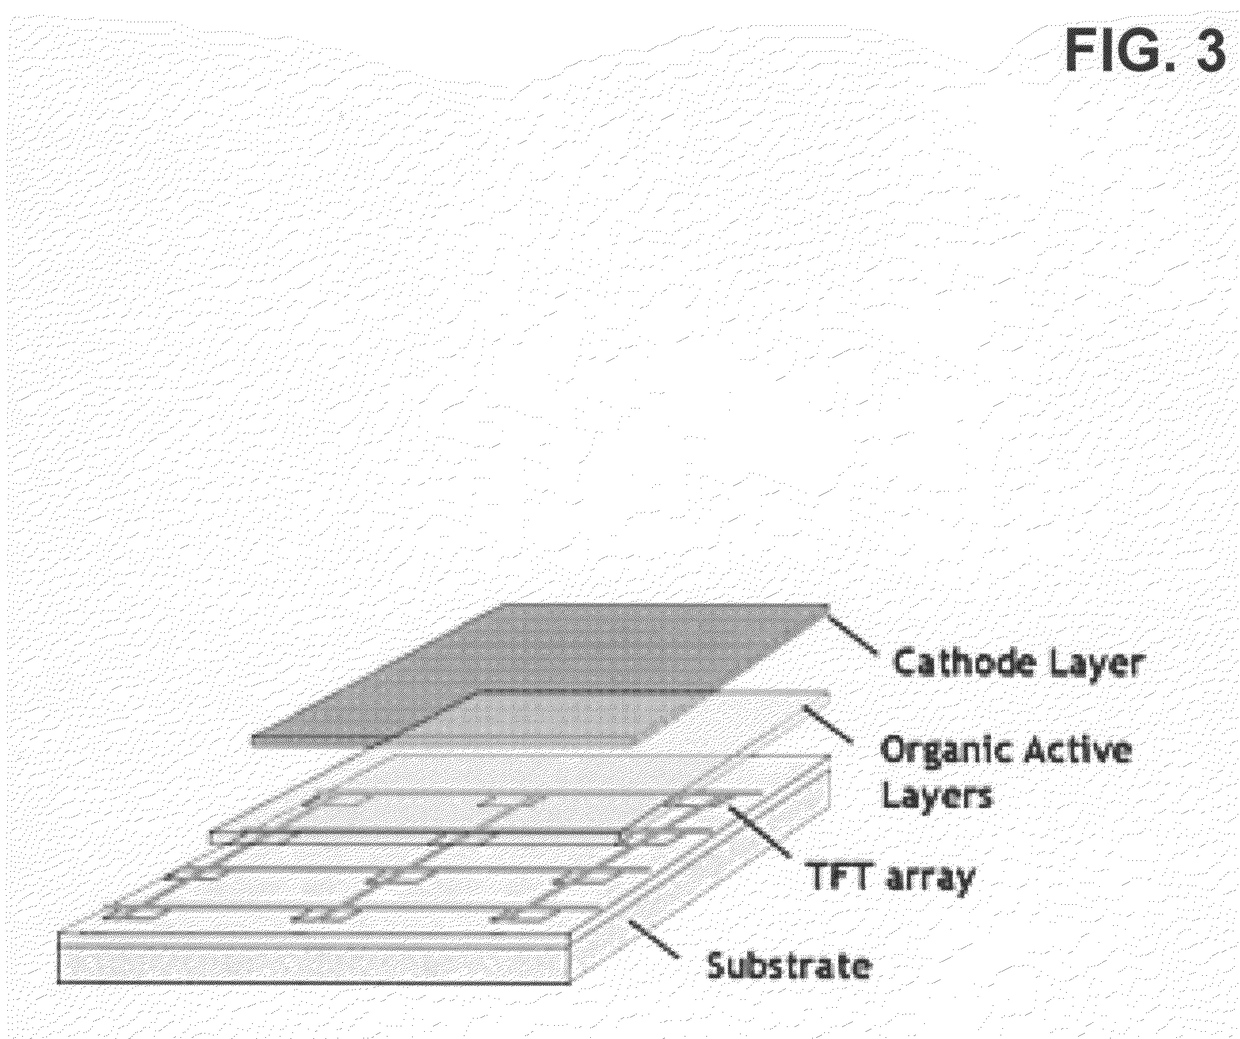 Semiconductor-based, large-area, flexible, electronic devices